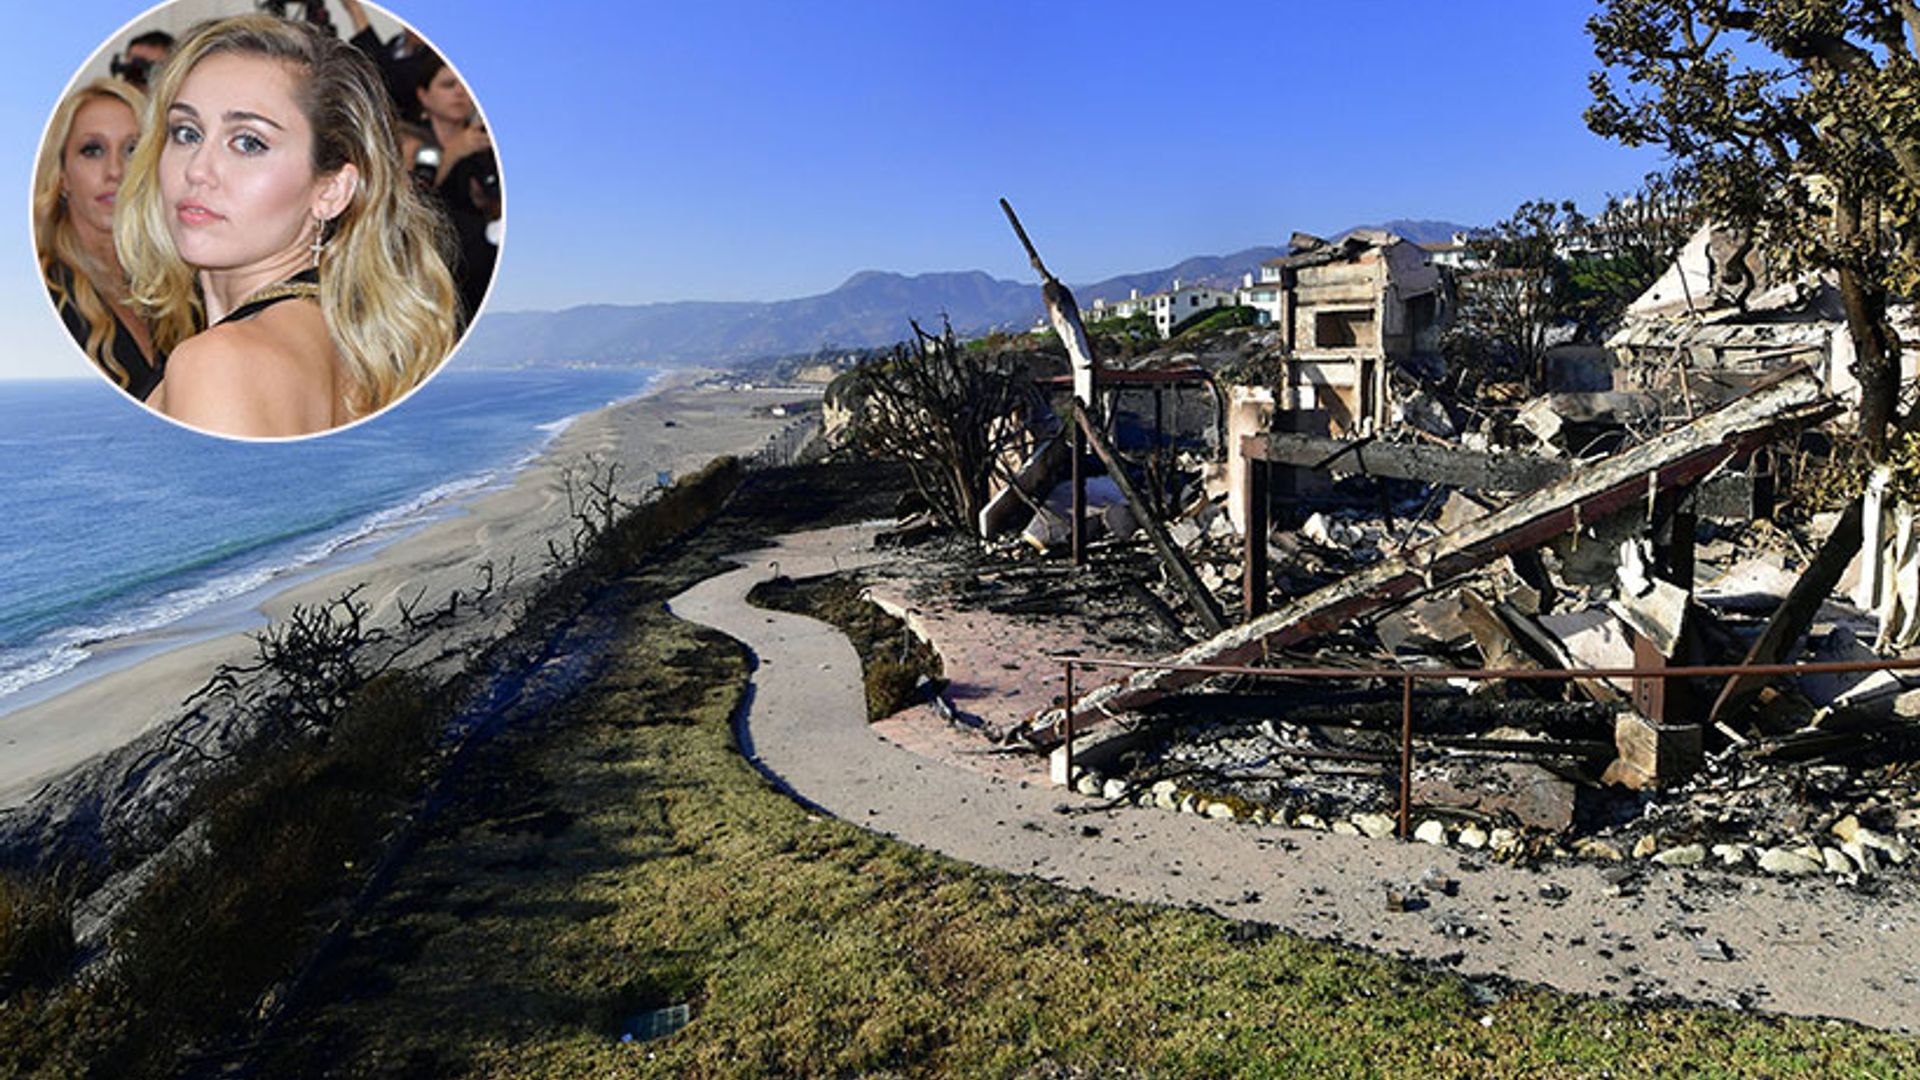 Miley Cyrus, Gerard Butler and more stars lose homes to devastating Malibu wildfires: see photos